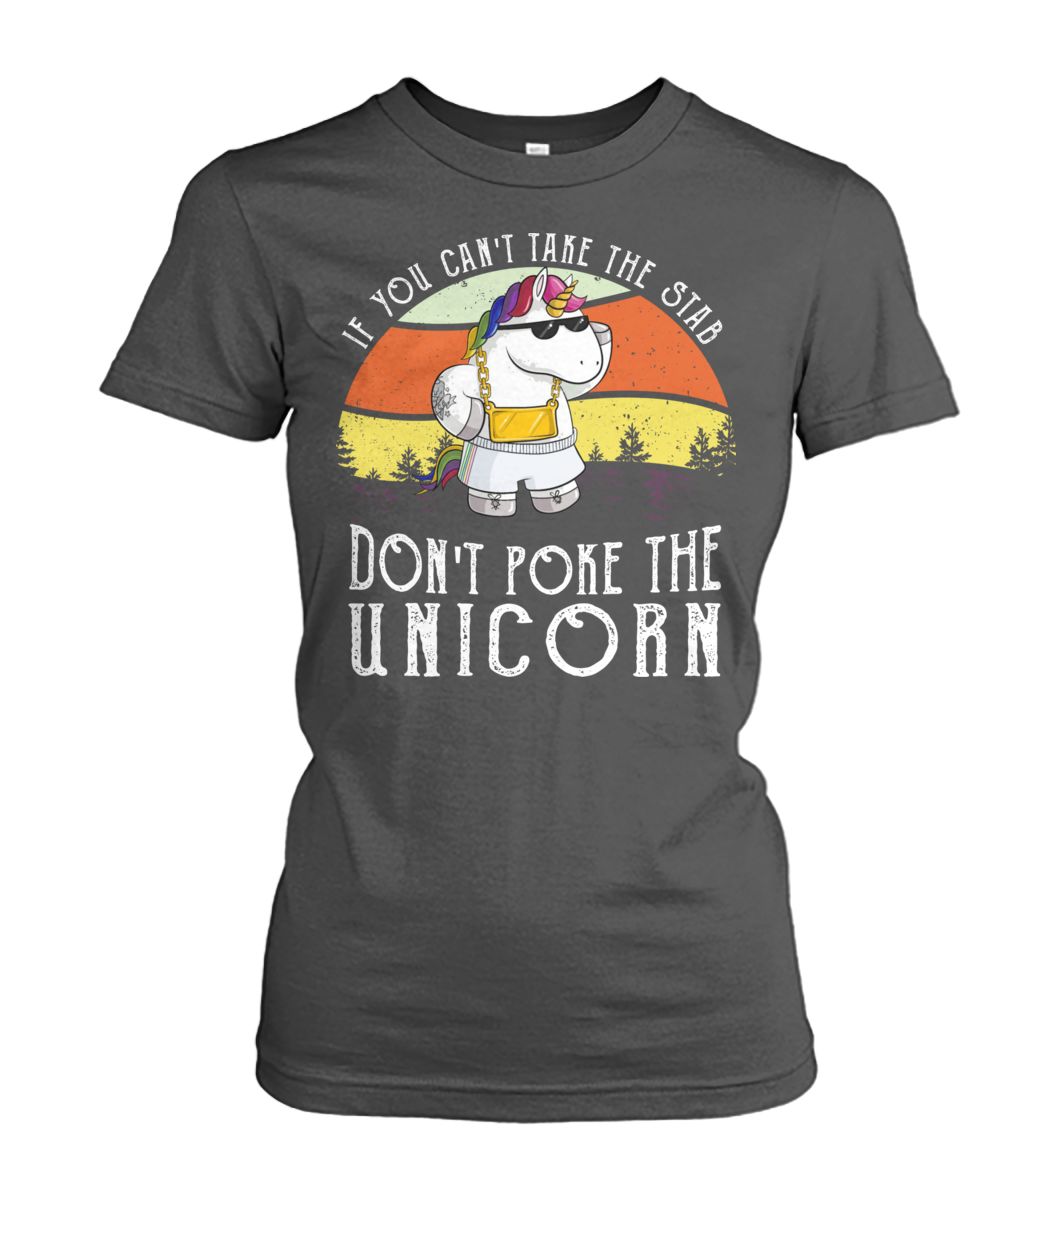 Vintage if you can't take the stab don't poke the unicorn women's crew tee